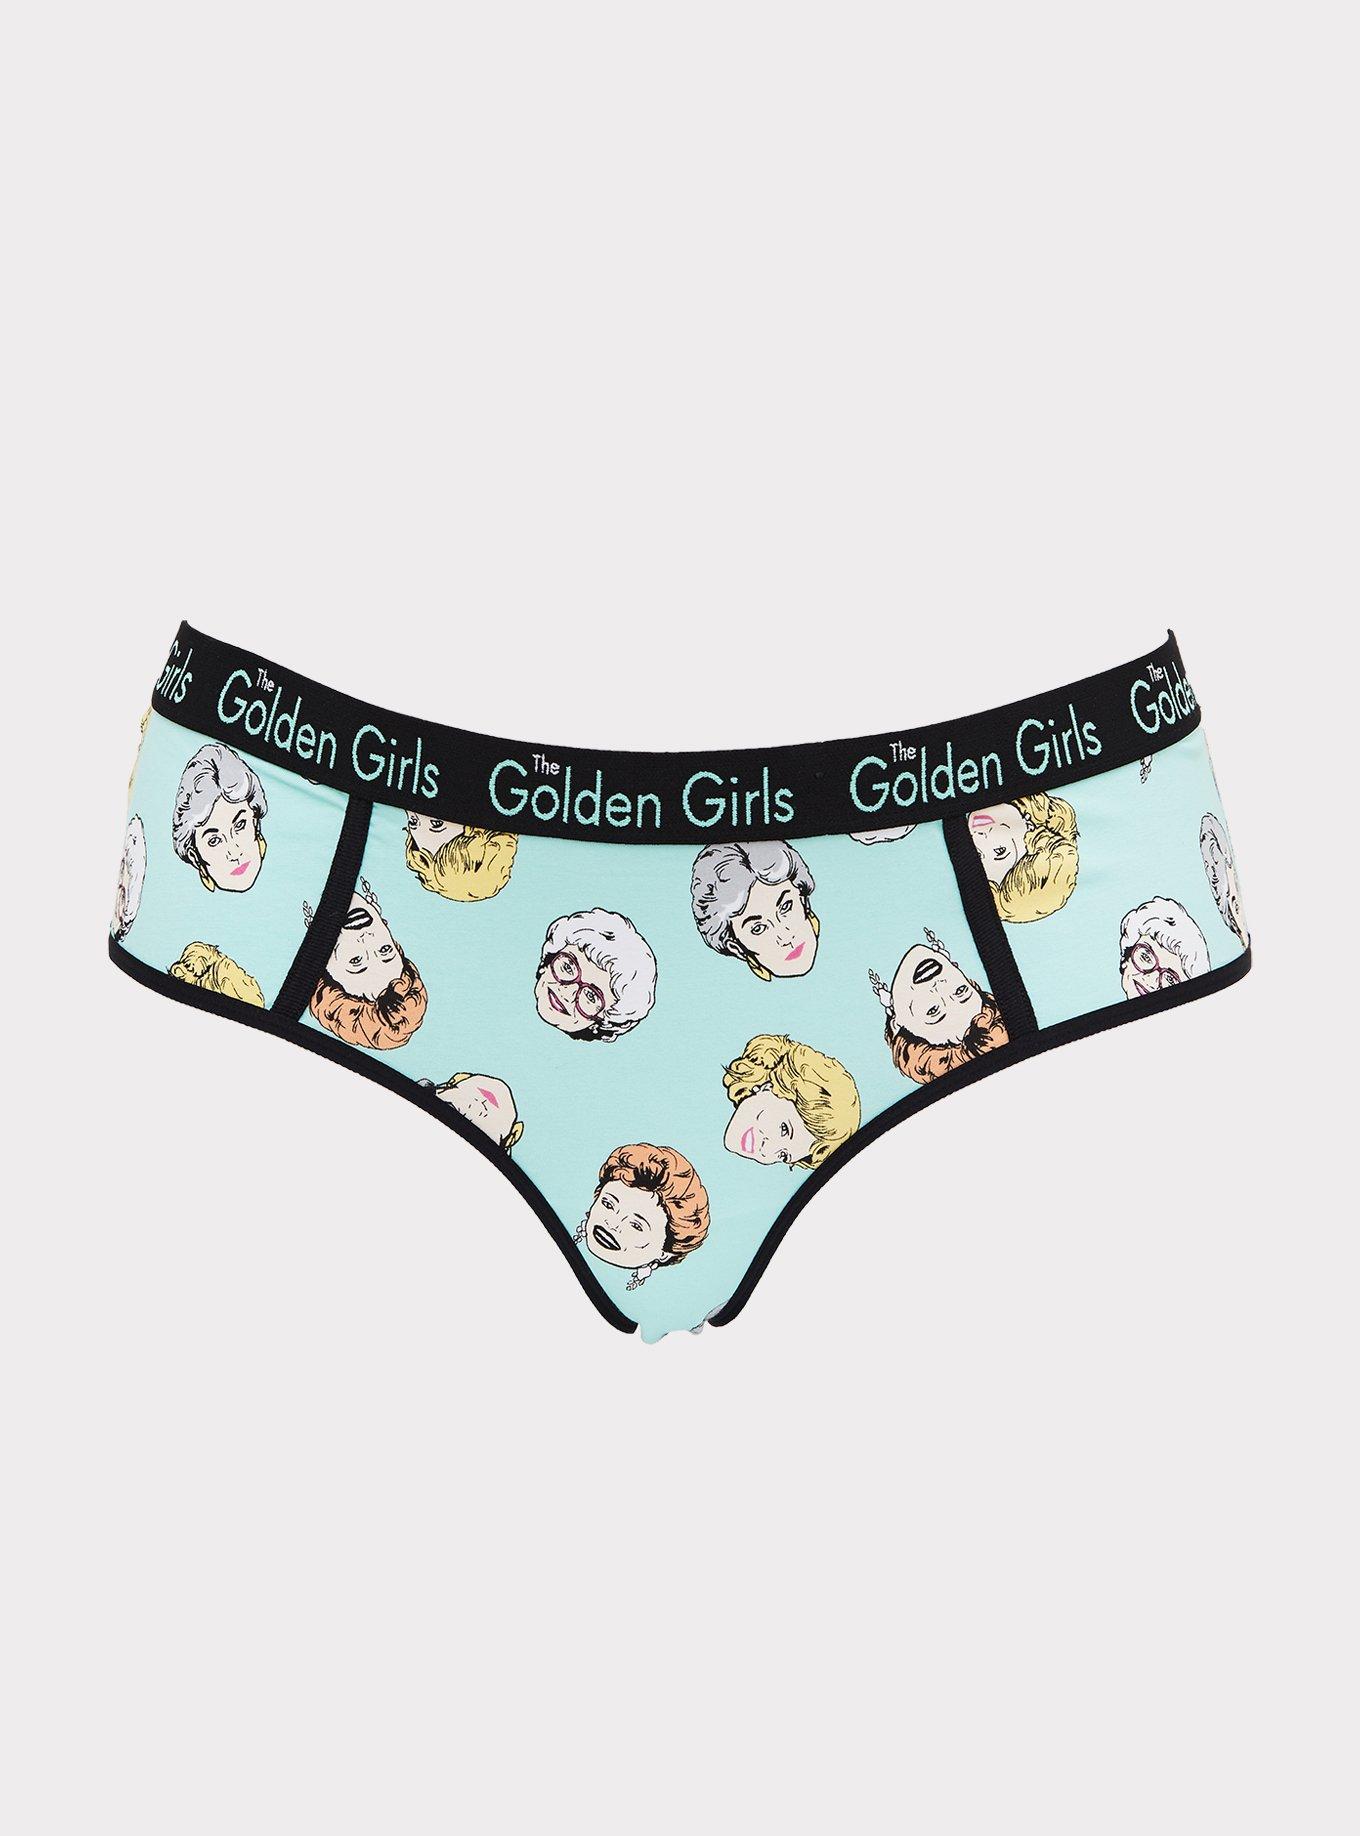 Buy Mid Waist Giraffe Print Hipster Panty in Golden Yellow with